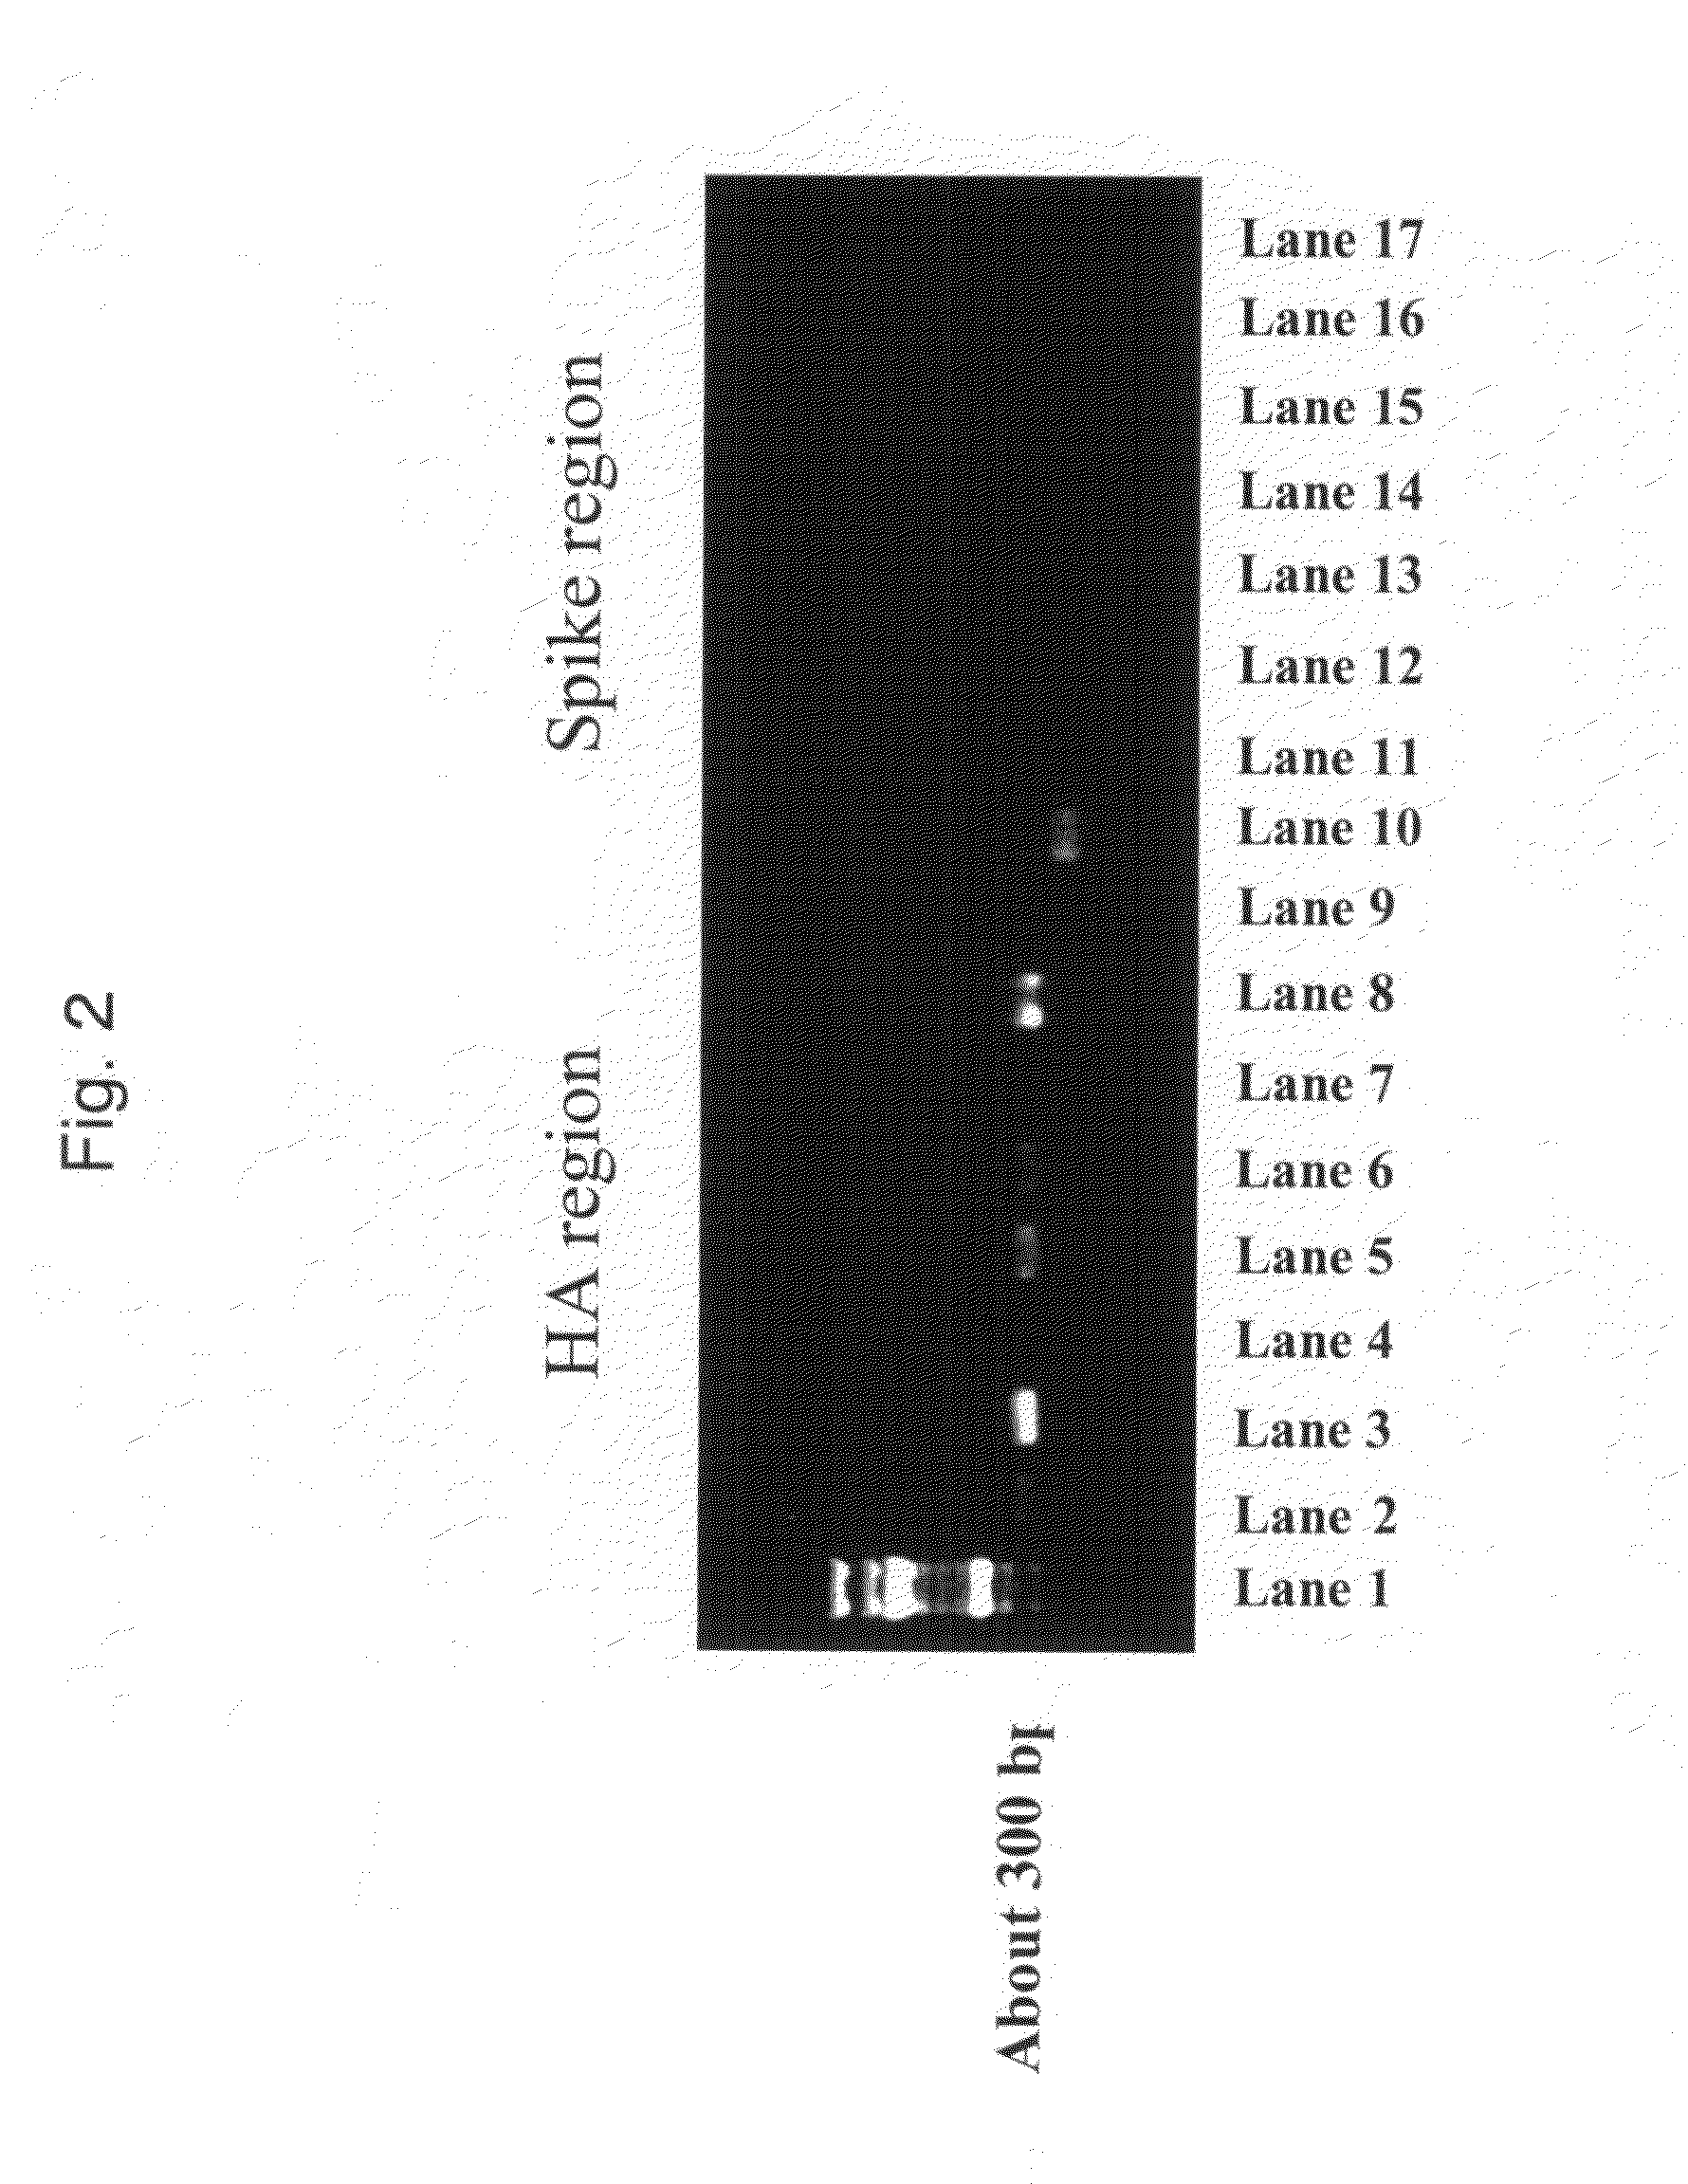 Recombinant virus and use thereof